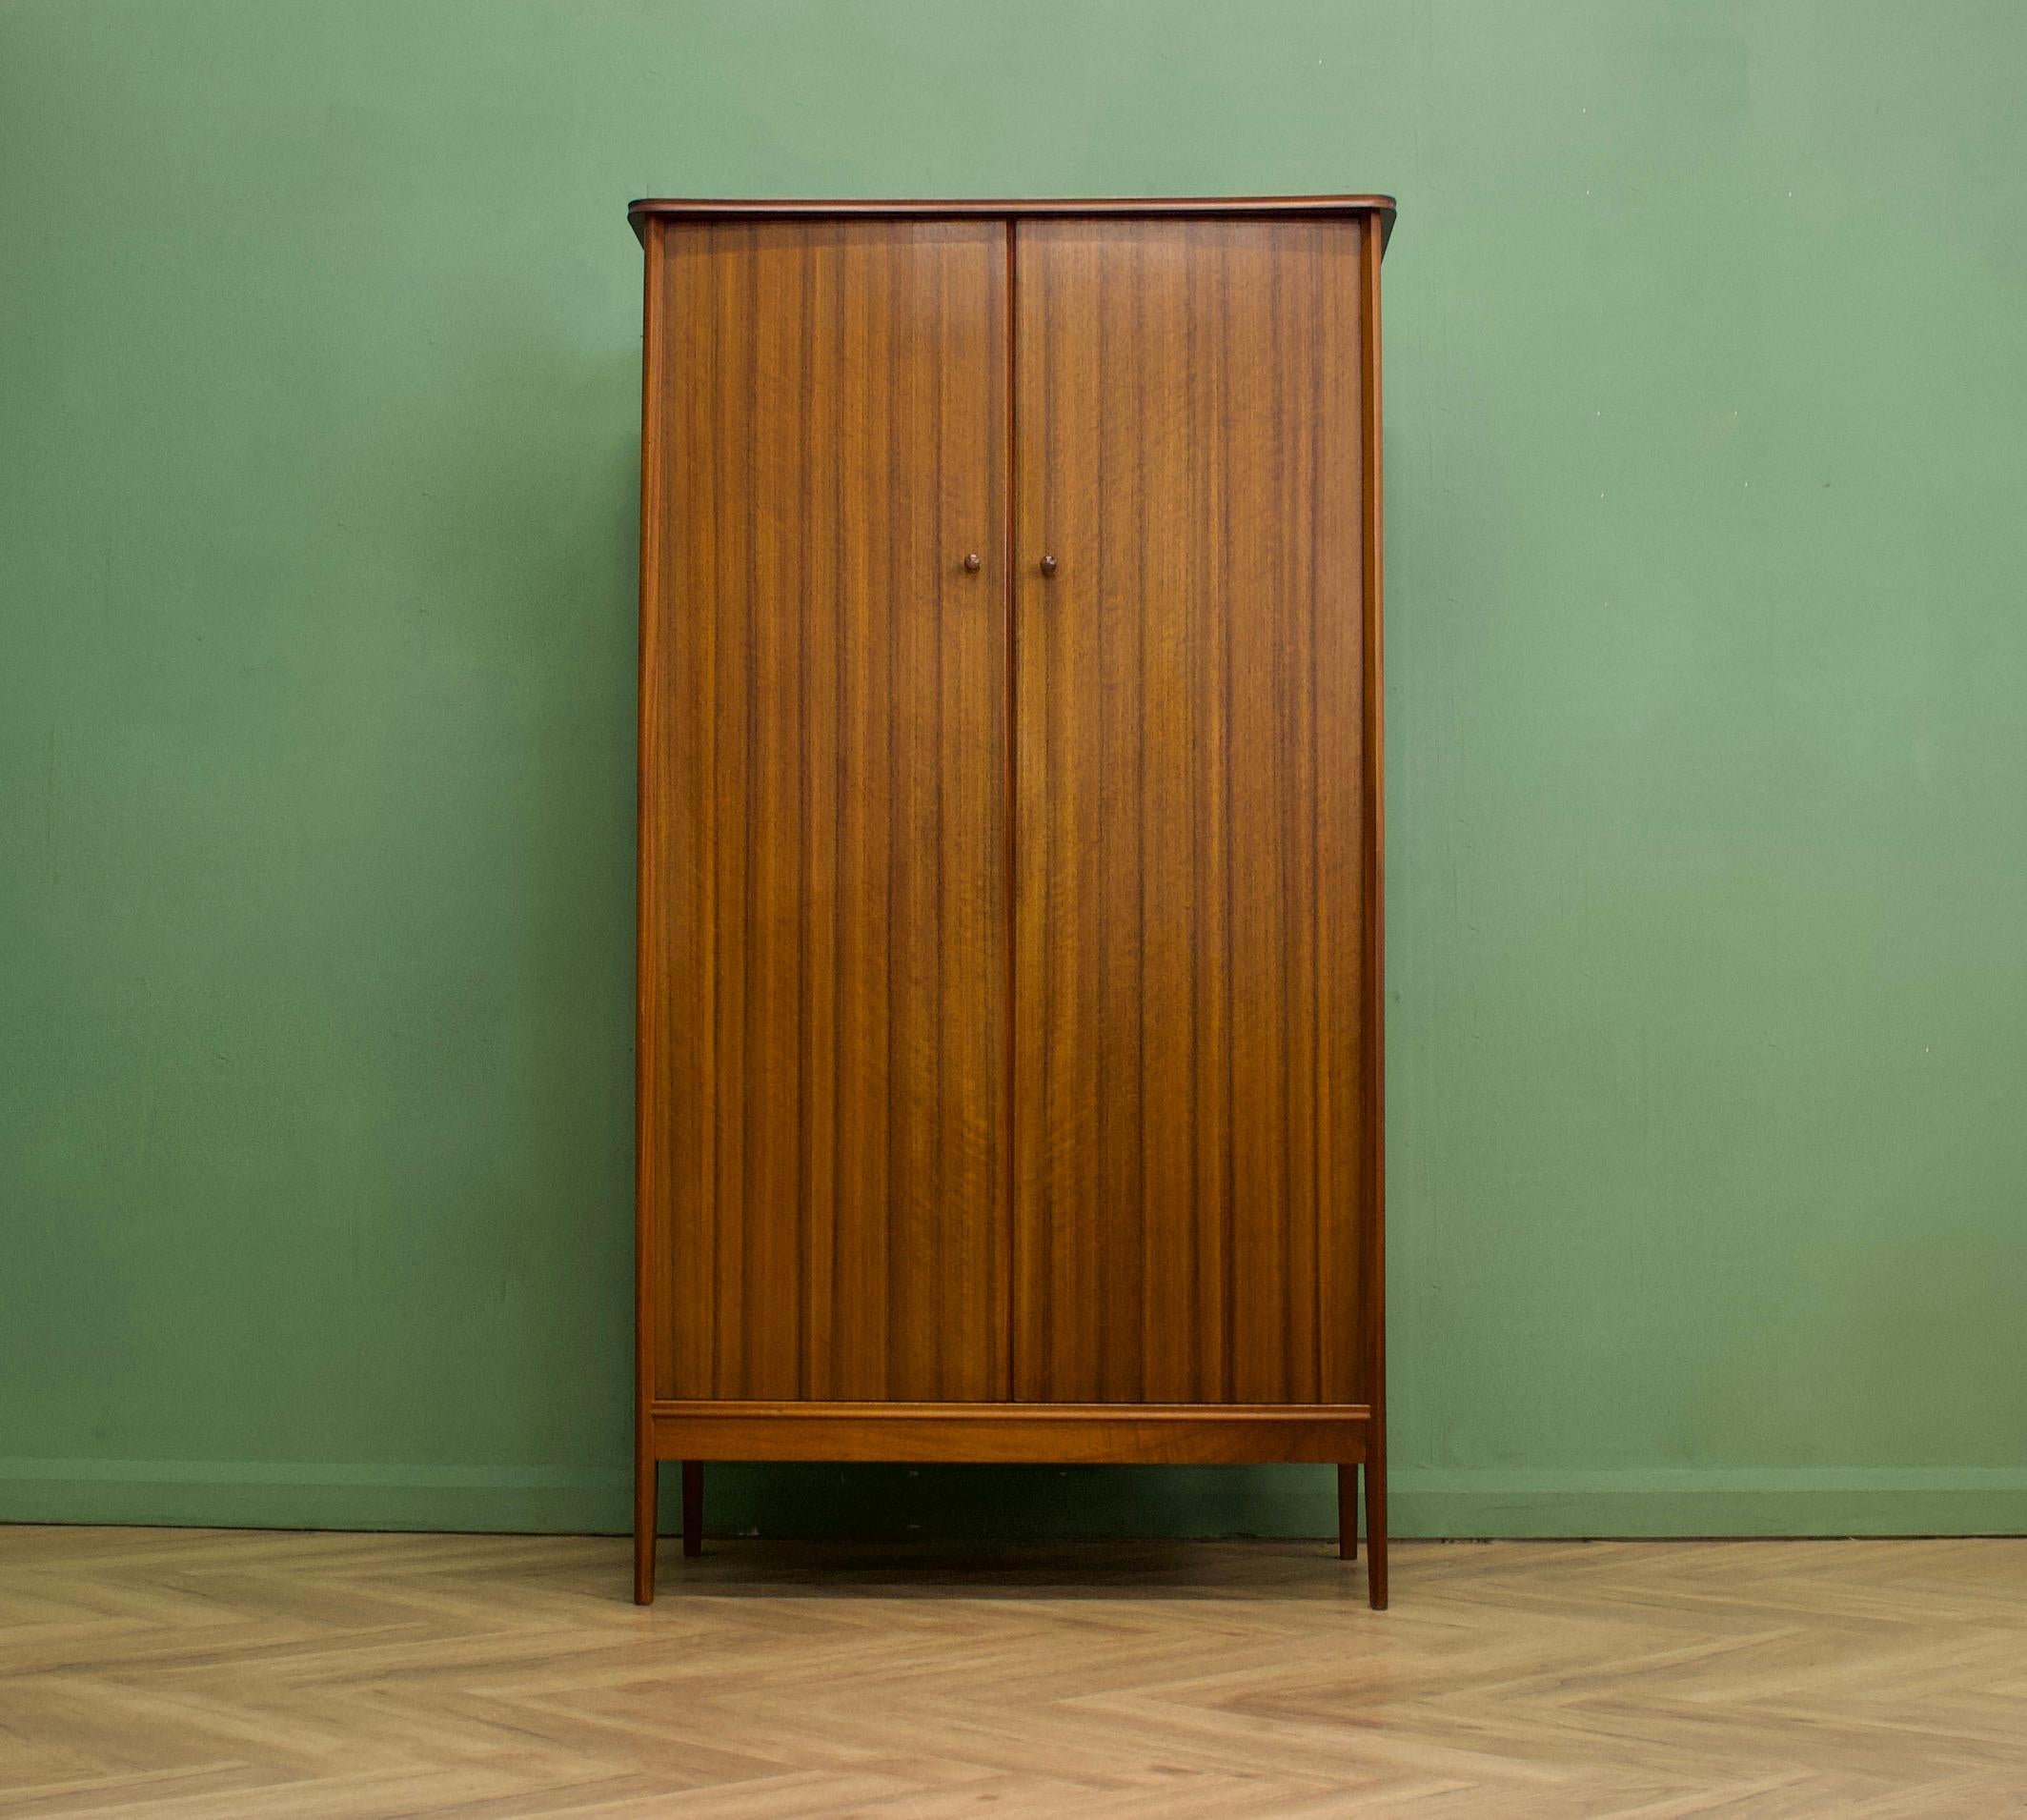 A walnut freestanding wardrobe designed by Peter Hayward for Vanson
Internally there is a clothes rail, shoe rail, drawers and a shelves
The attractive legs are slightly tapered and splayed